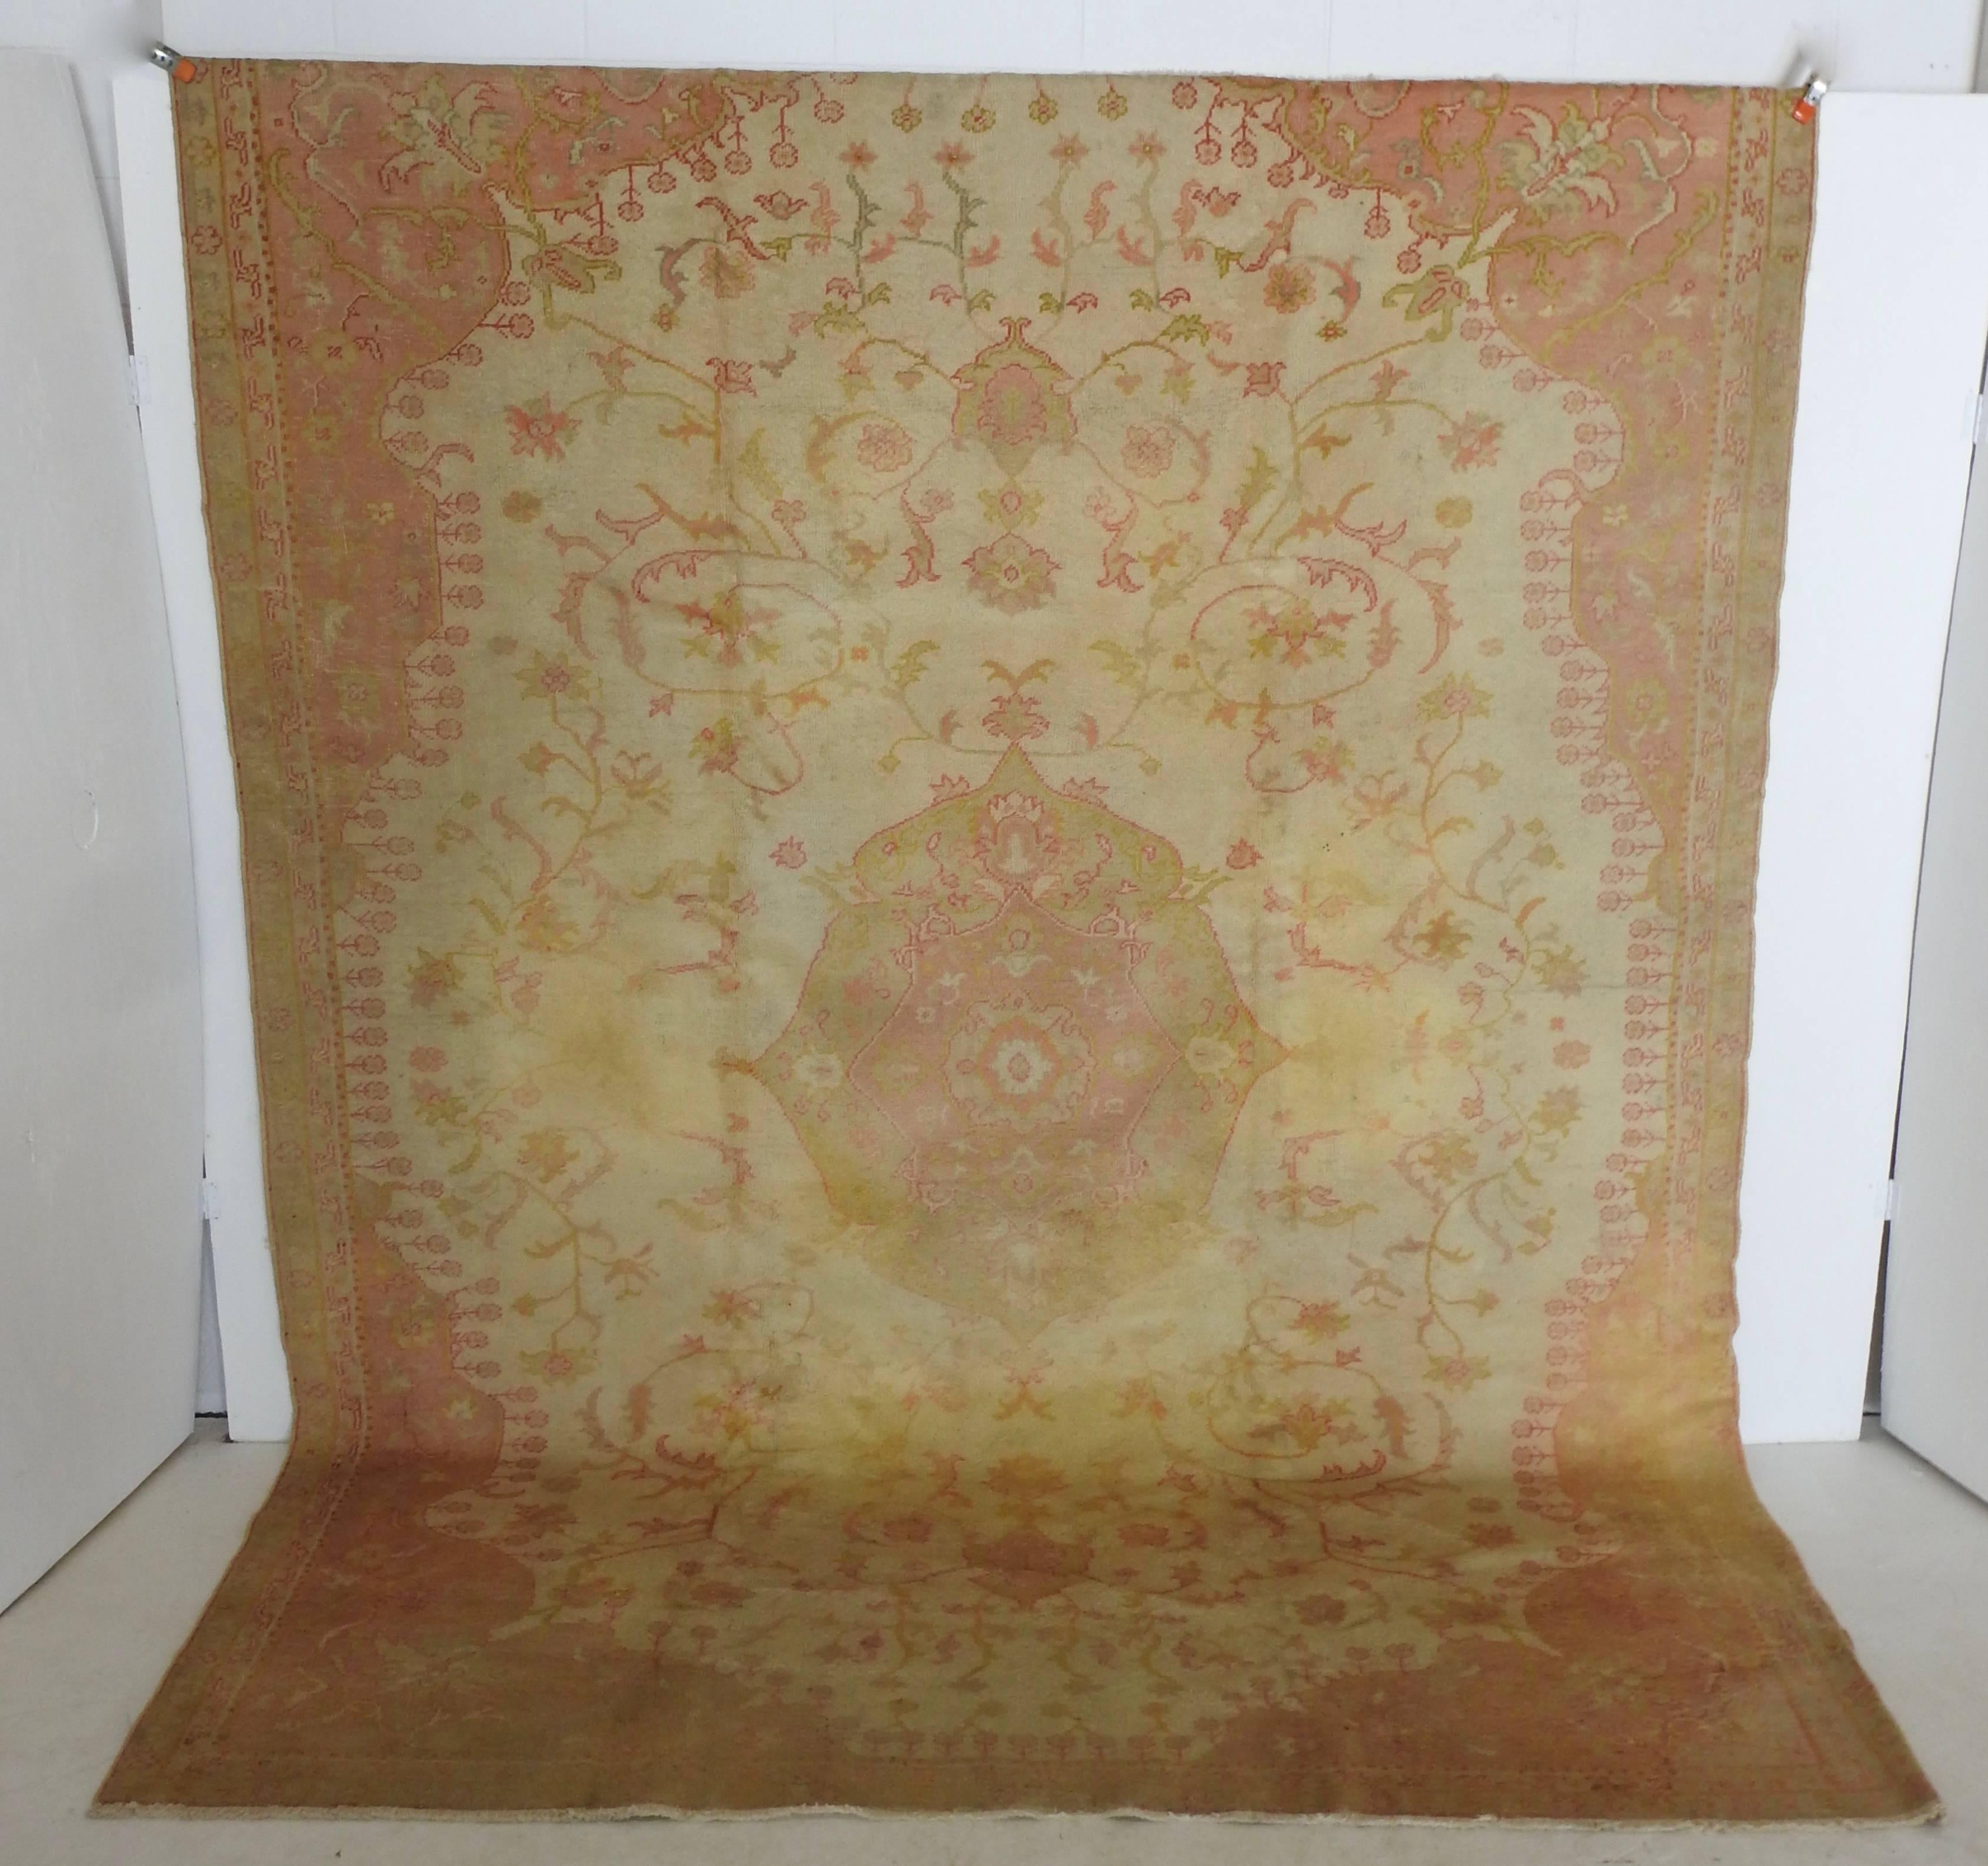 Beautiful soft shades of salmon, cream and gold with a hint of green decorate this stunning rug. Vegetable dyes have gently faded over the years. The rug is made of hand knotted wool with some fringe on the ends. This rug still has many years of